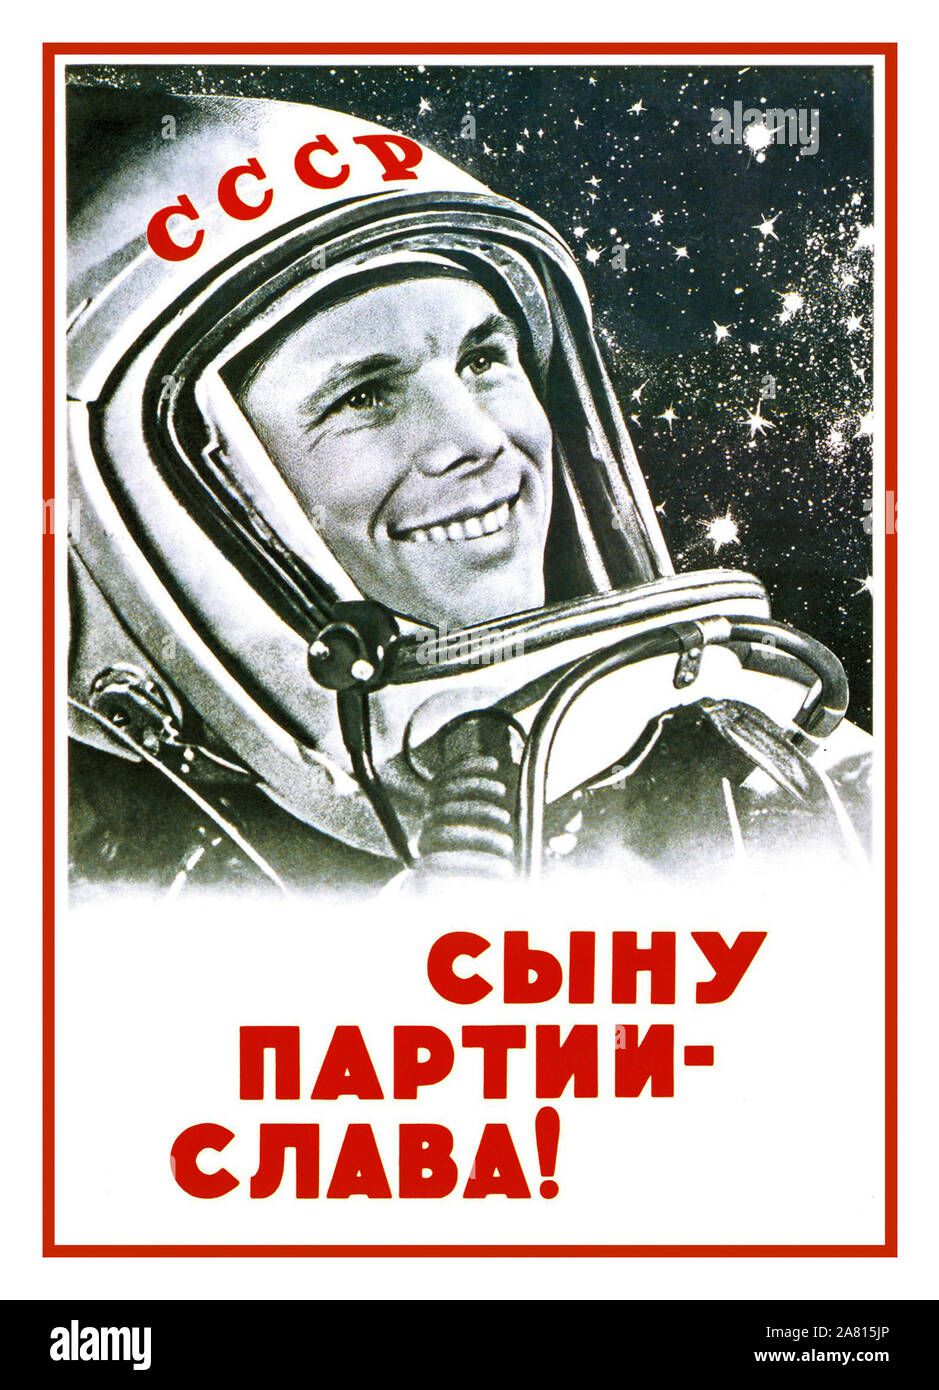 YURI GAGARIN Vintage 1960's  [ “ TO THE SON OF THE PARTY - GLORY ! “]   Soviet CCCP Russian Space Race exploration Poster celebrating Cosmonaut Yuri Gagarin – The First Man in Space; April 12, 1961. Stock Photo